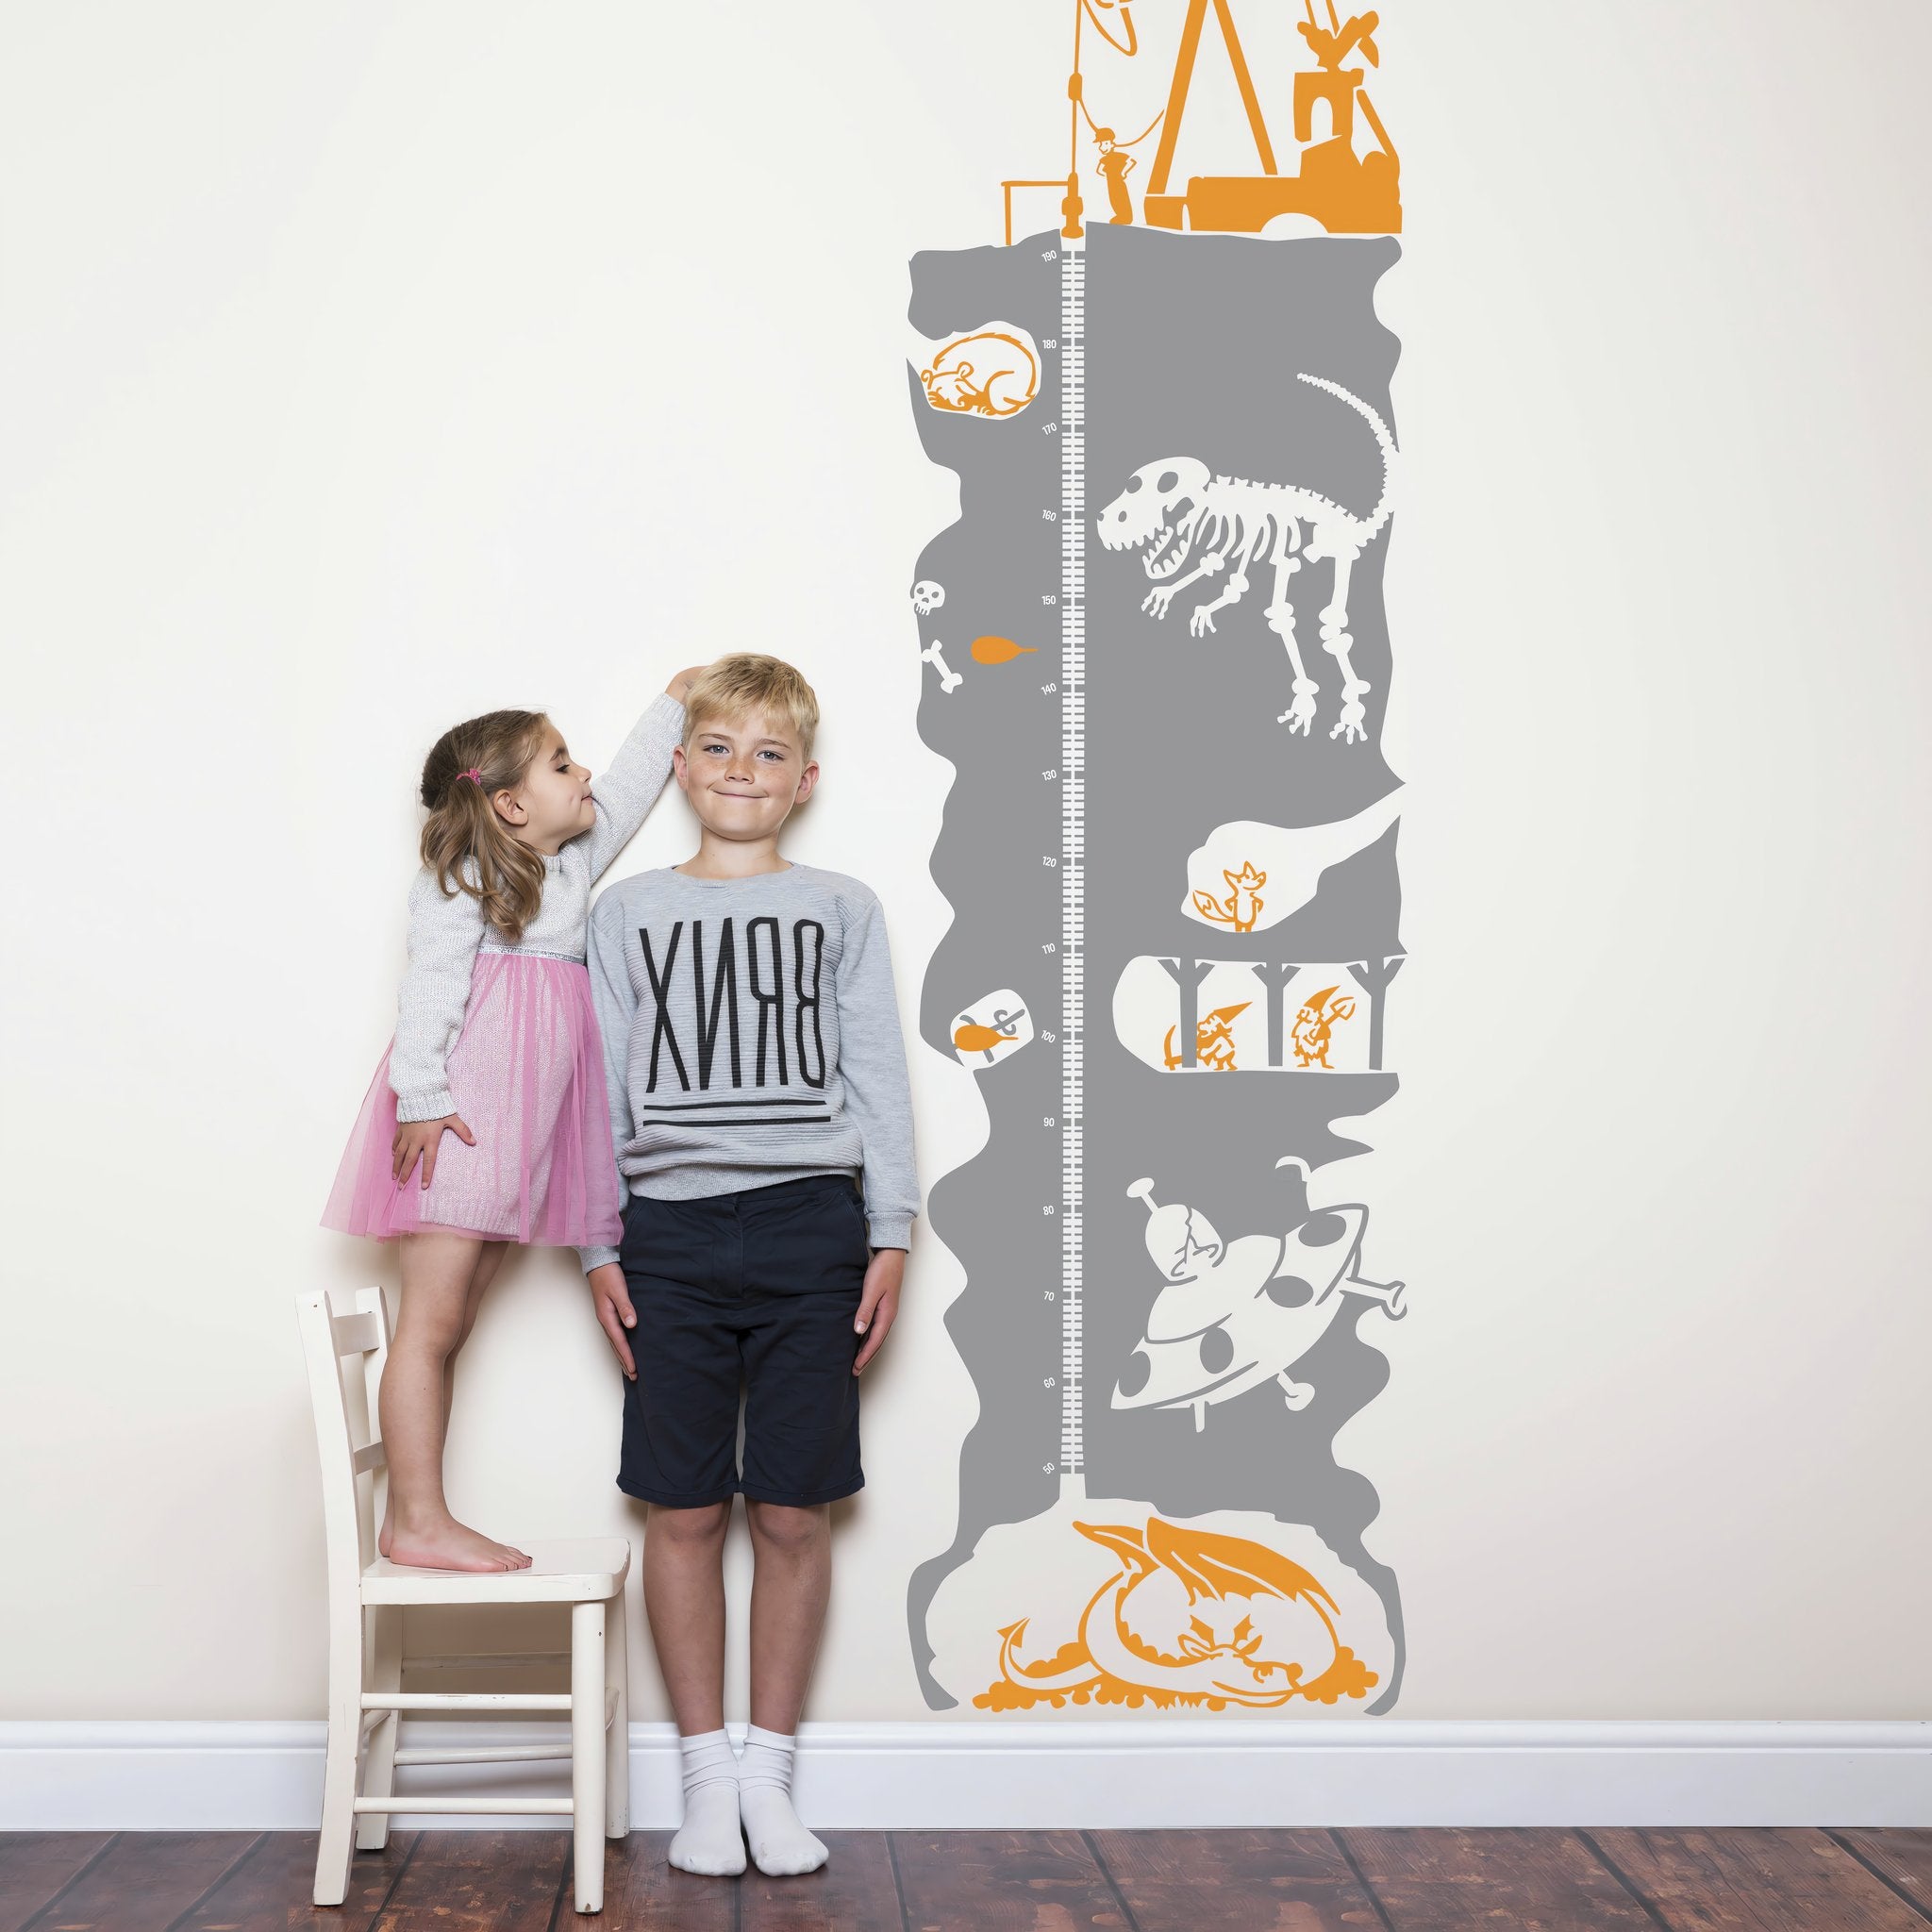 Height chart wall sticker of an underground mineshaft with a young boy and girl nearby.